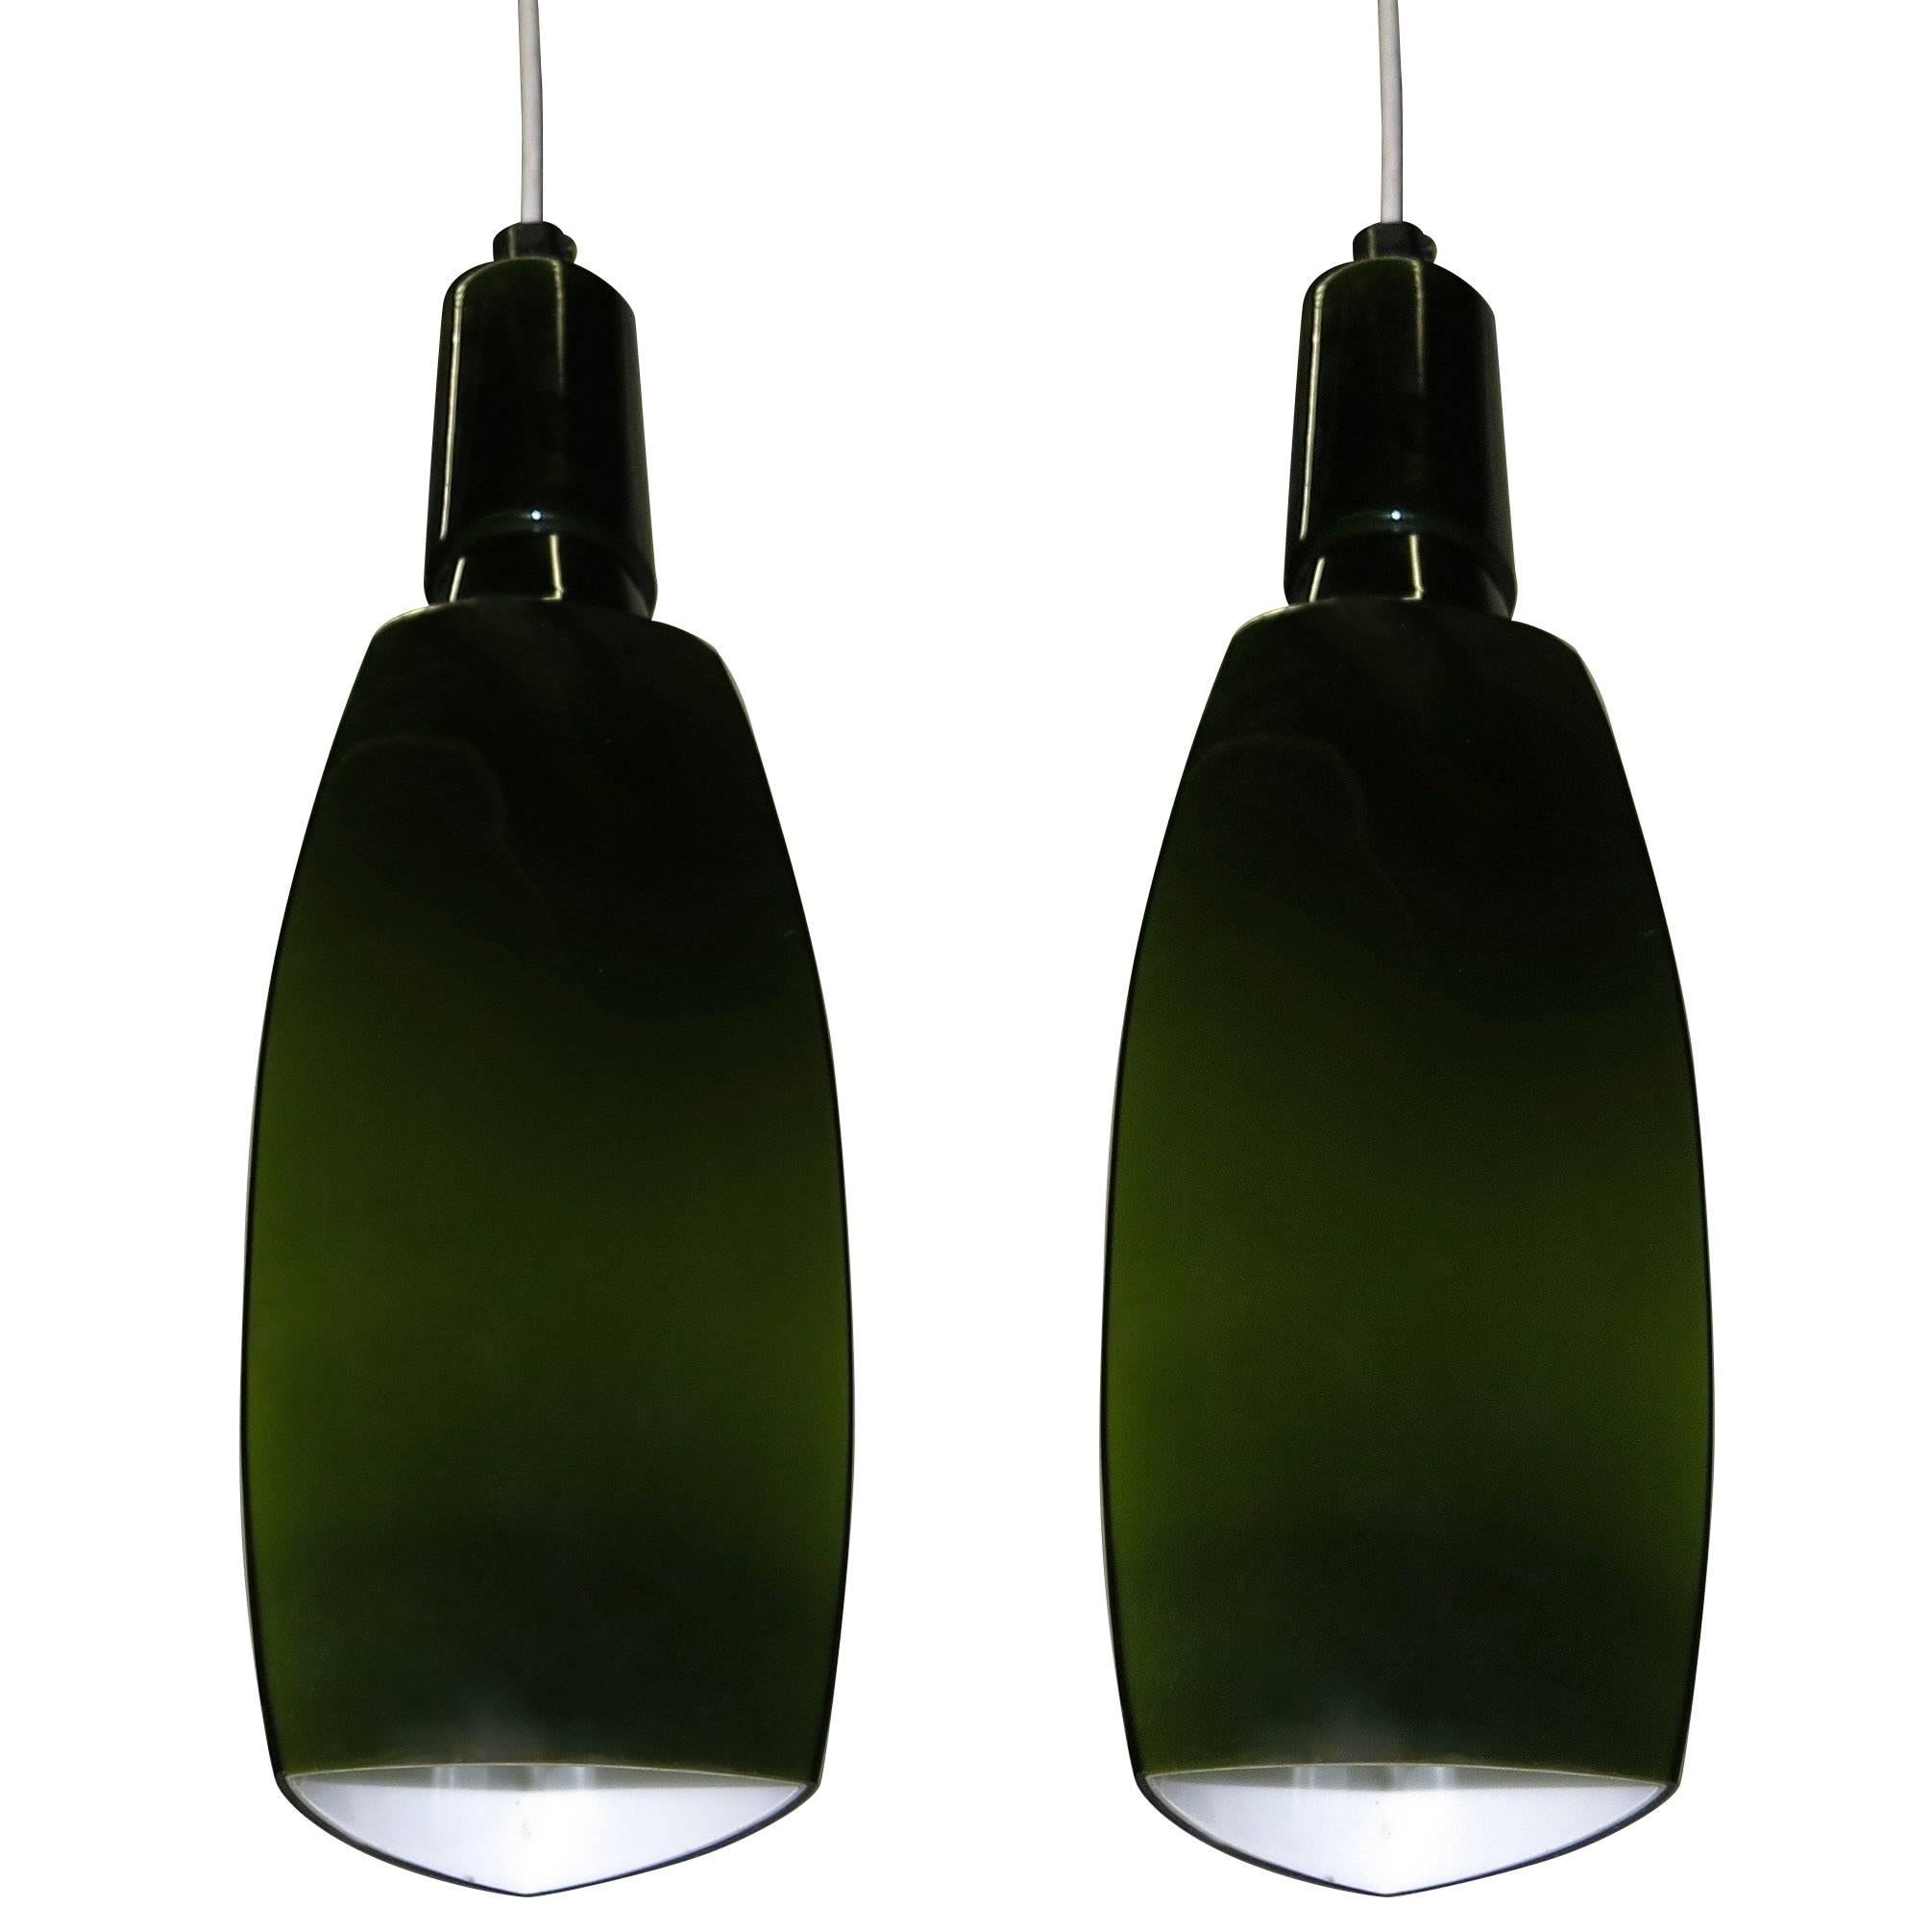 Pair of Green Cased Glass Ceiling Lights by Stilnovo, Italy, 1960s For Sale